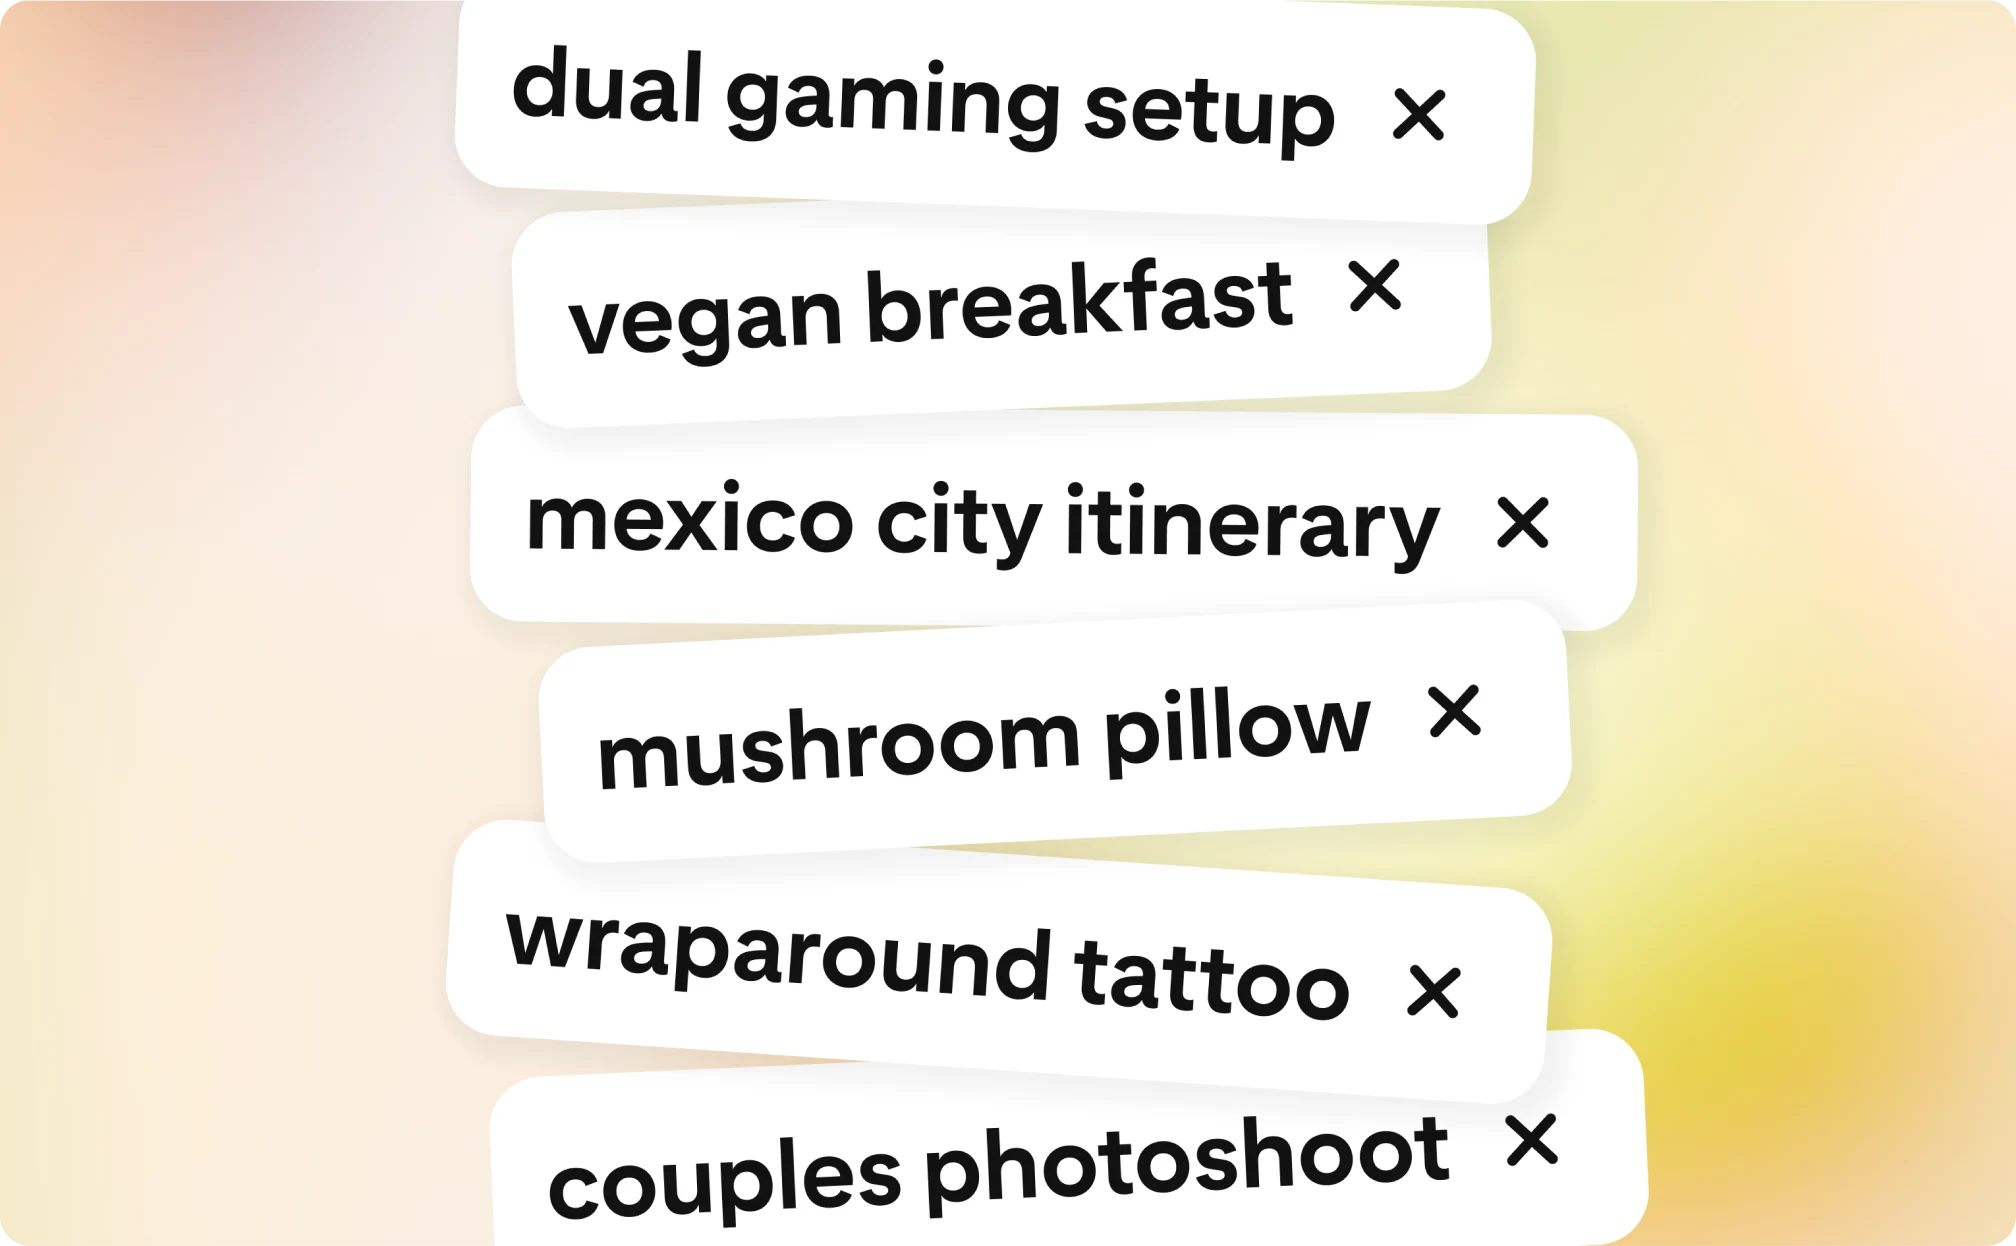 A list of search terms like “wraparound tattoo” and “dual gaming setup.” 